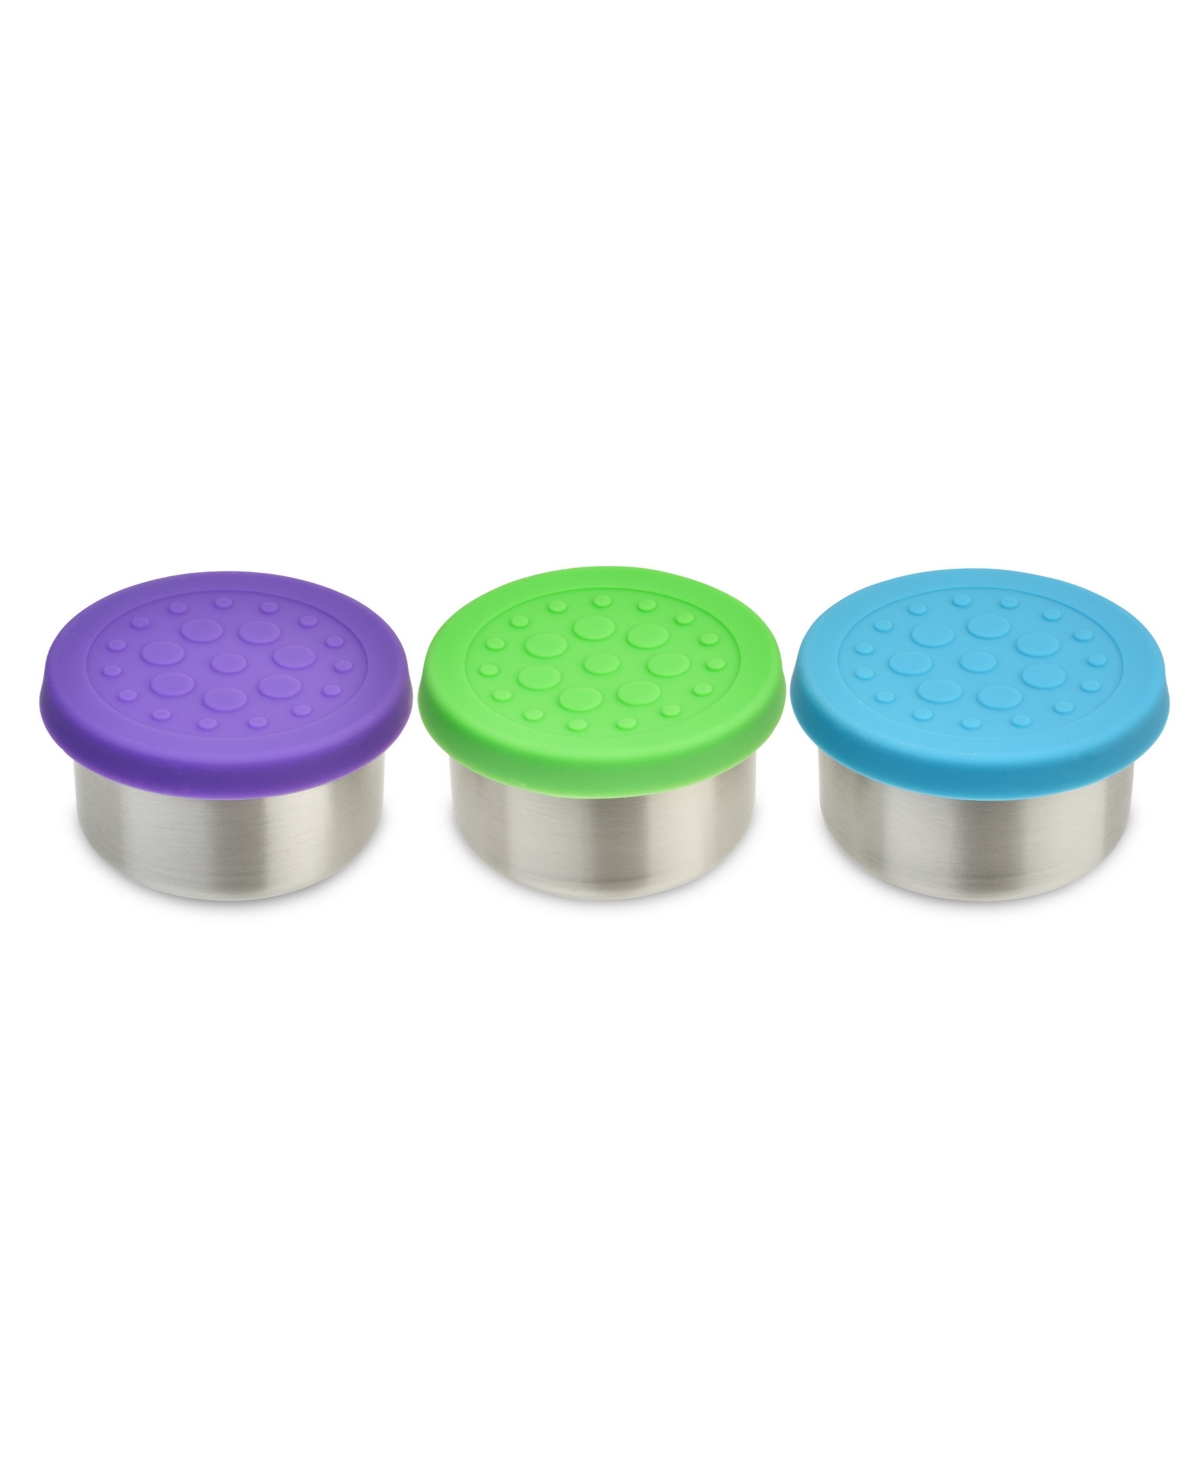 Lunchbots 1.5 oz Dips Stainless Steel Leak-resistant Condiment Holders Assorted Color Silicone Lids, Set Of 3 In Floral